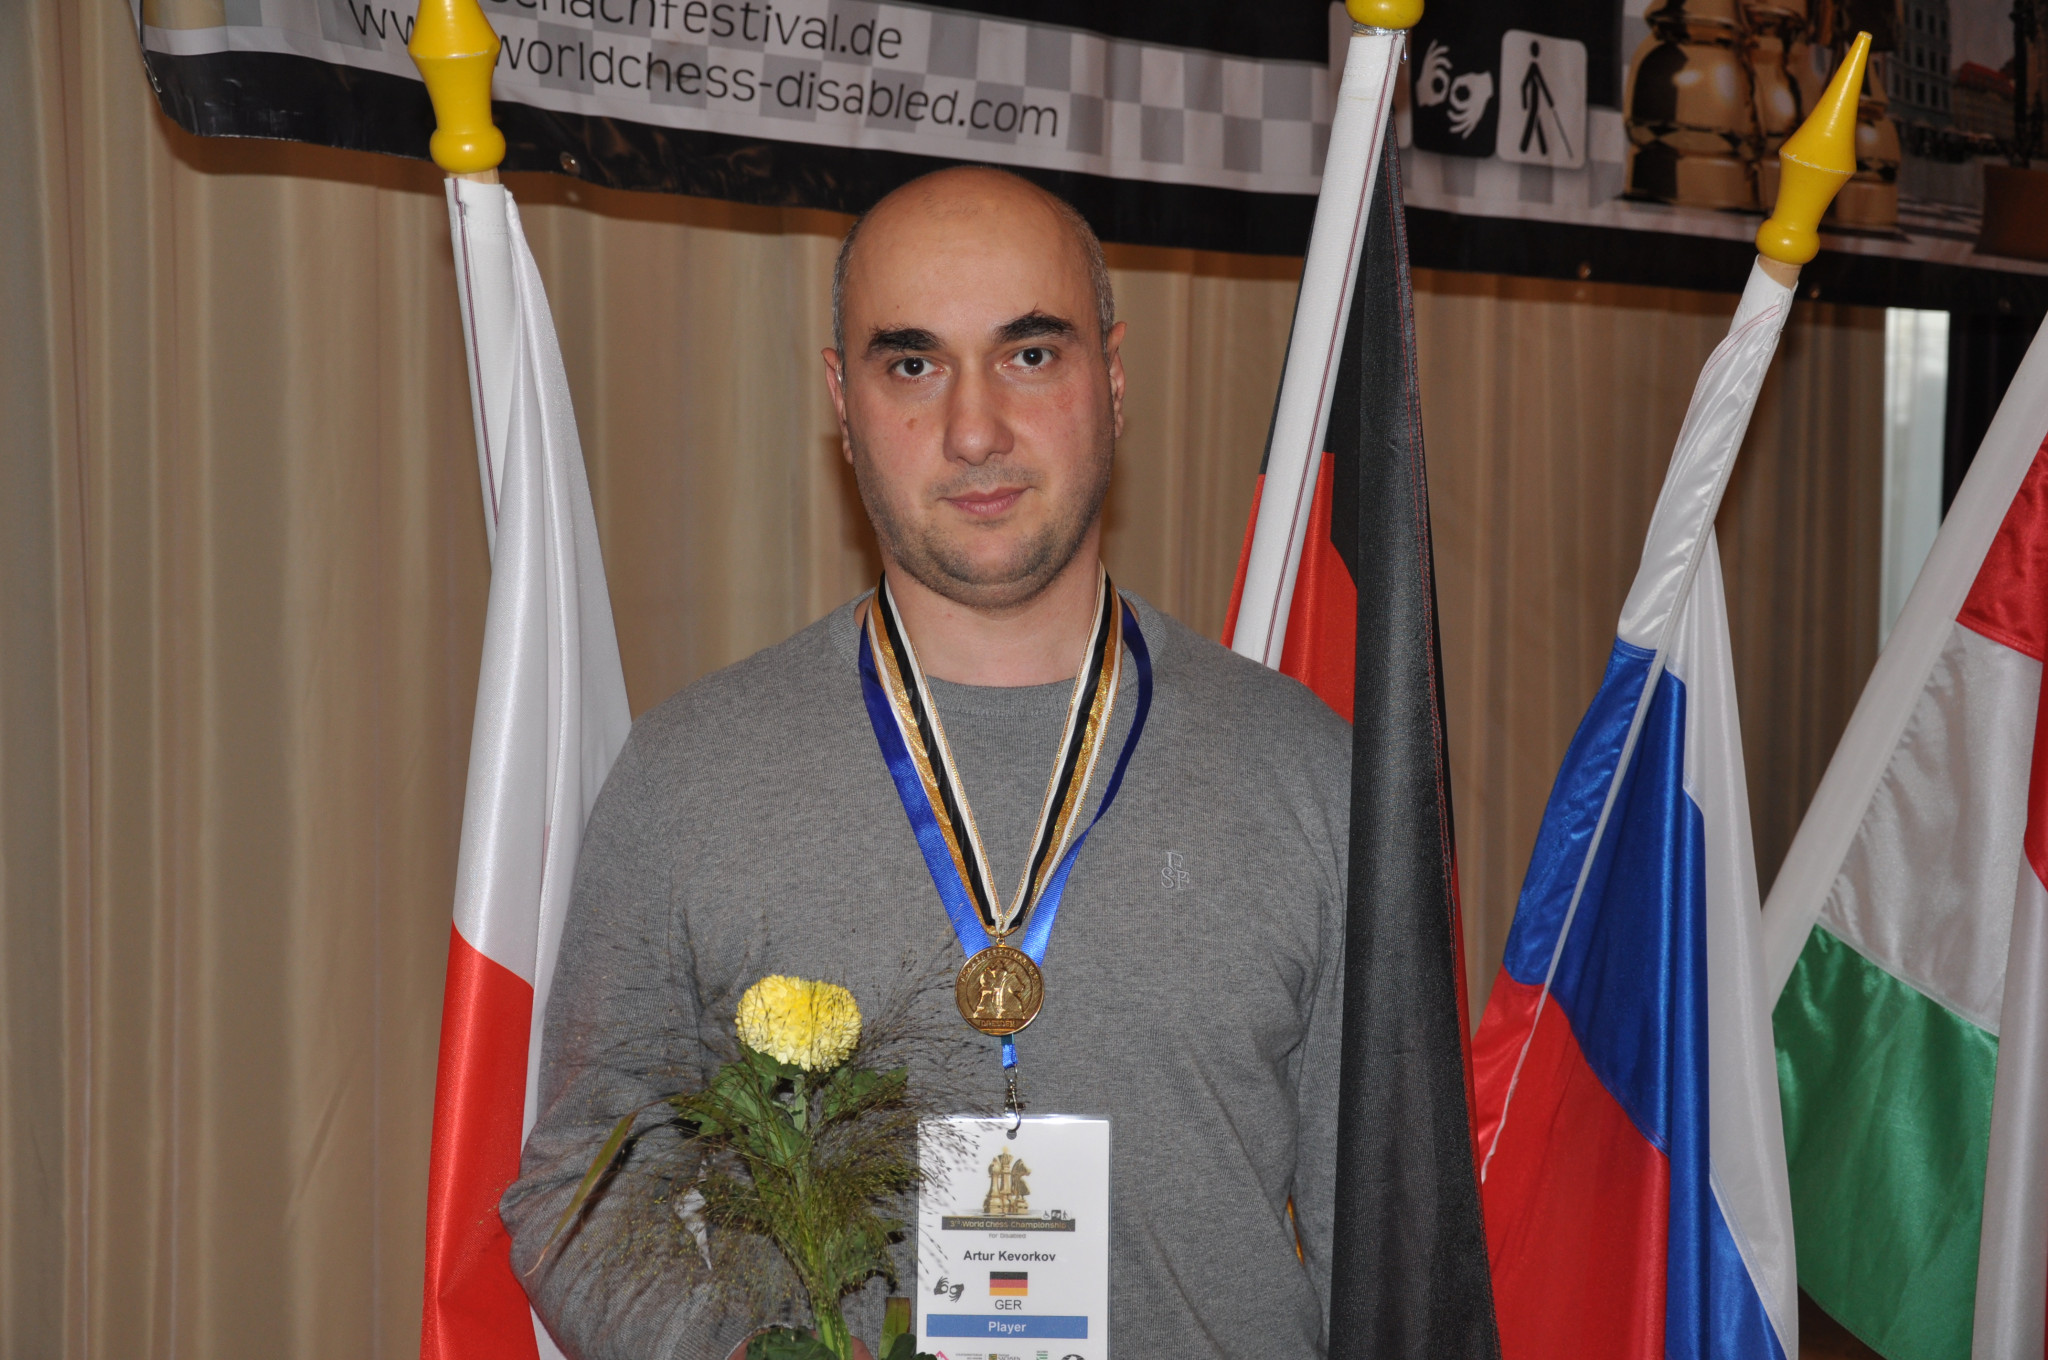 Germany's Artur Kevorkov was the top-ranked deaf player ©World Chess Championship for the Disabled